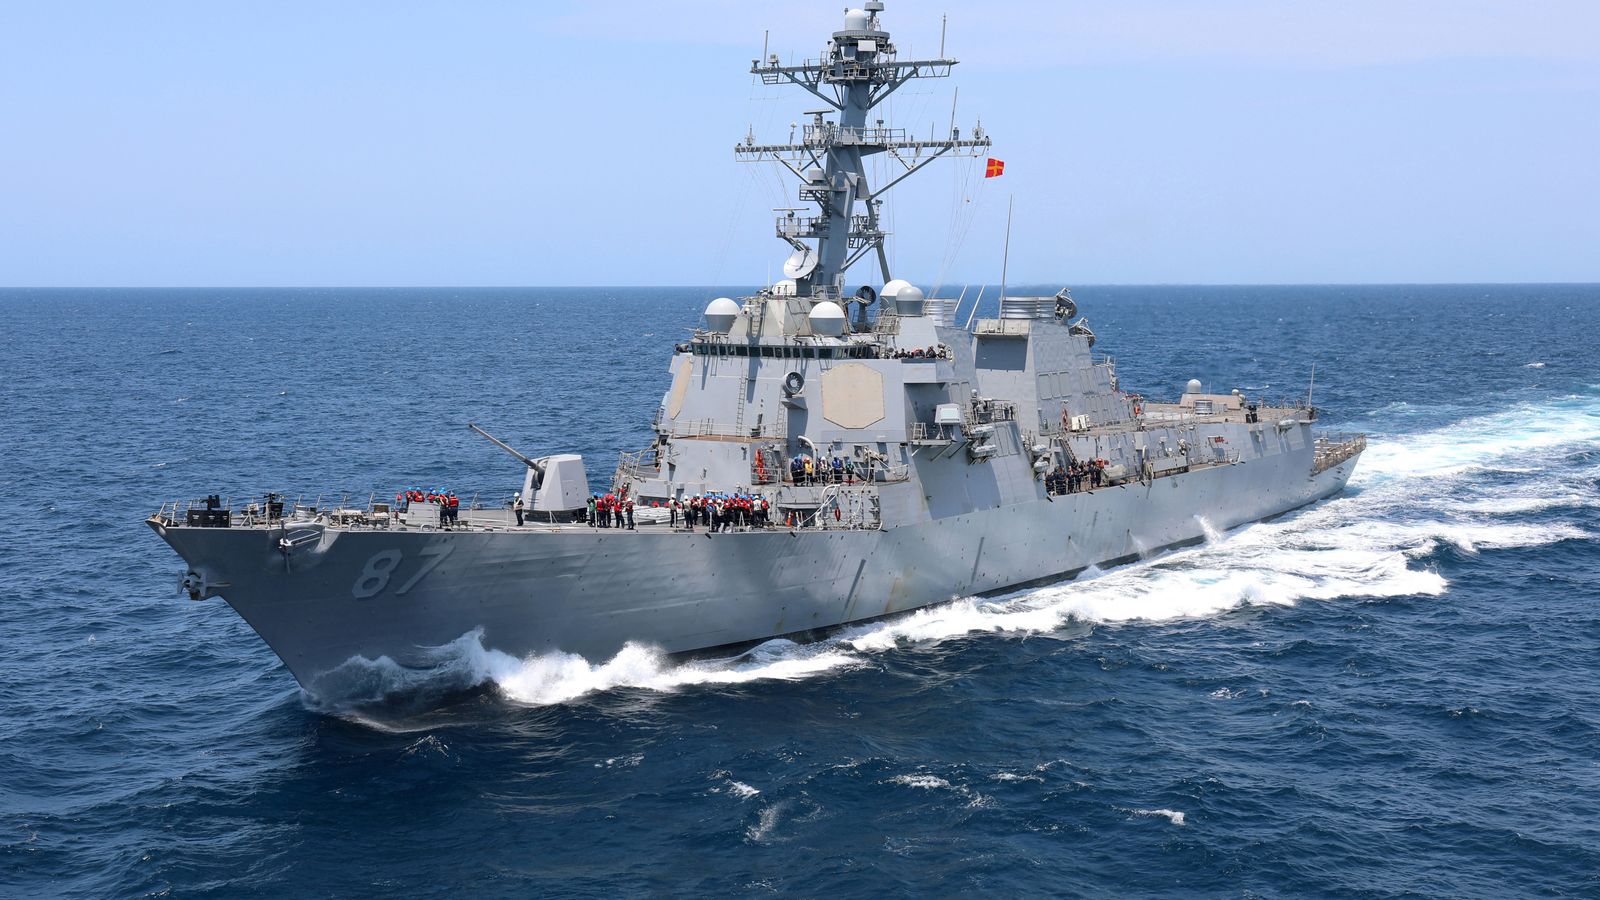 US warship aids Israeli-linked tanker after attack in Gulf of Aden